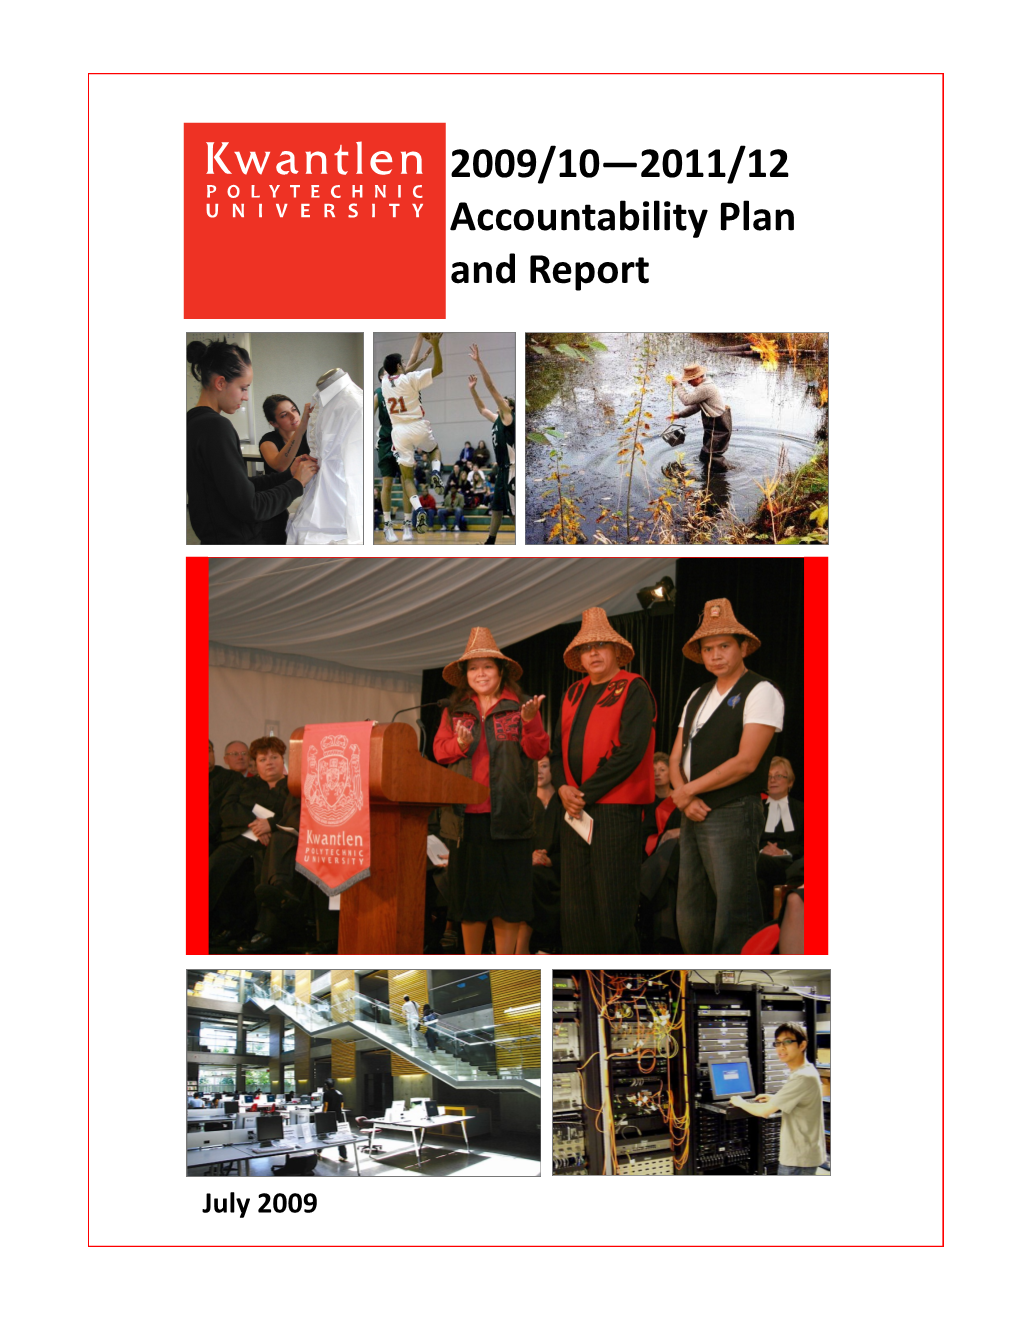 2009/10—2011/12 Accountability Plan and Report